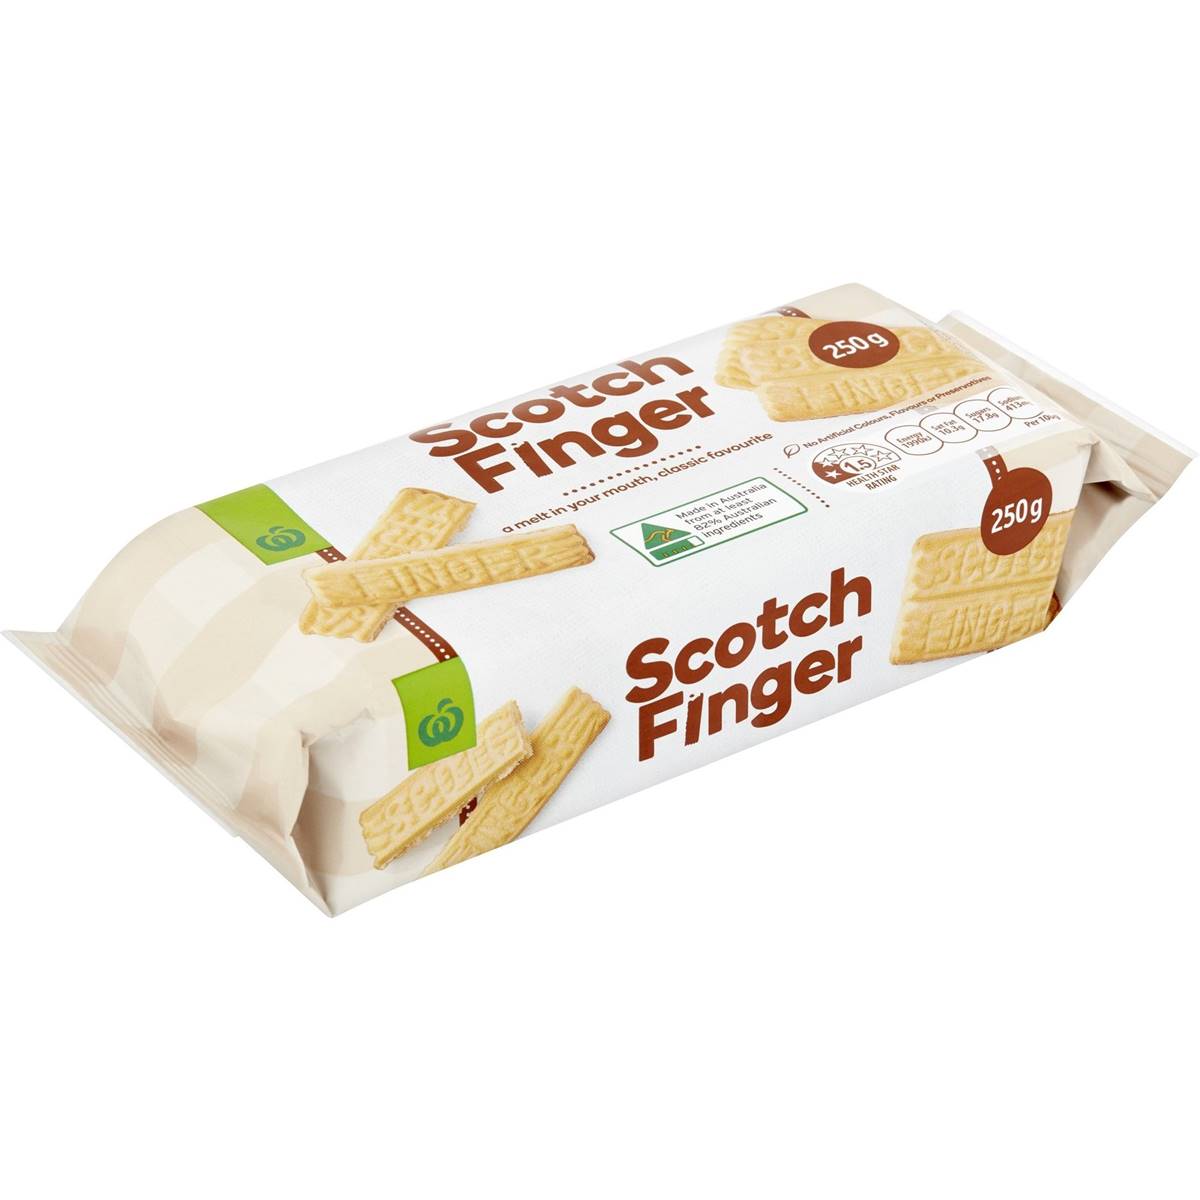 Calories in Woolworths Scotch Fingers